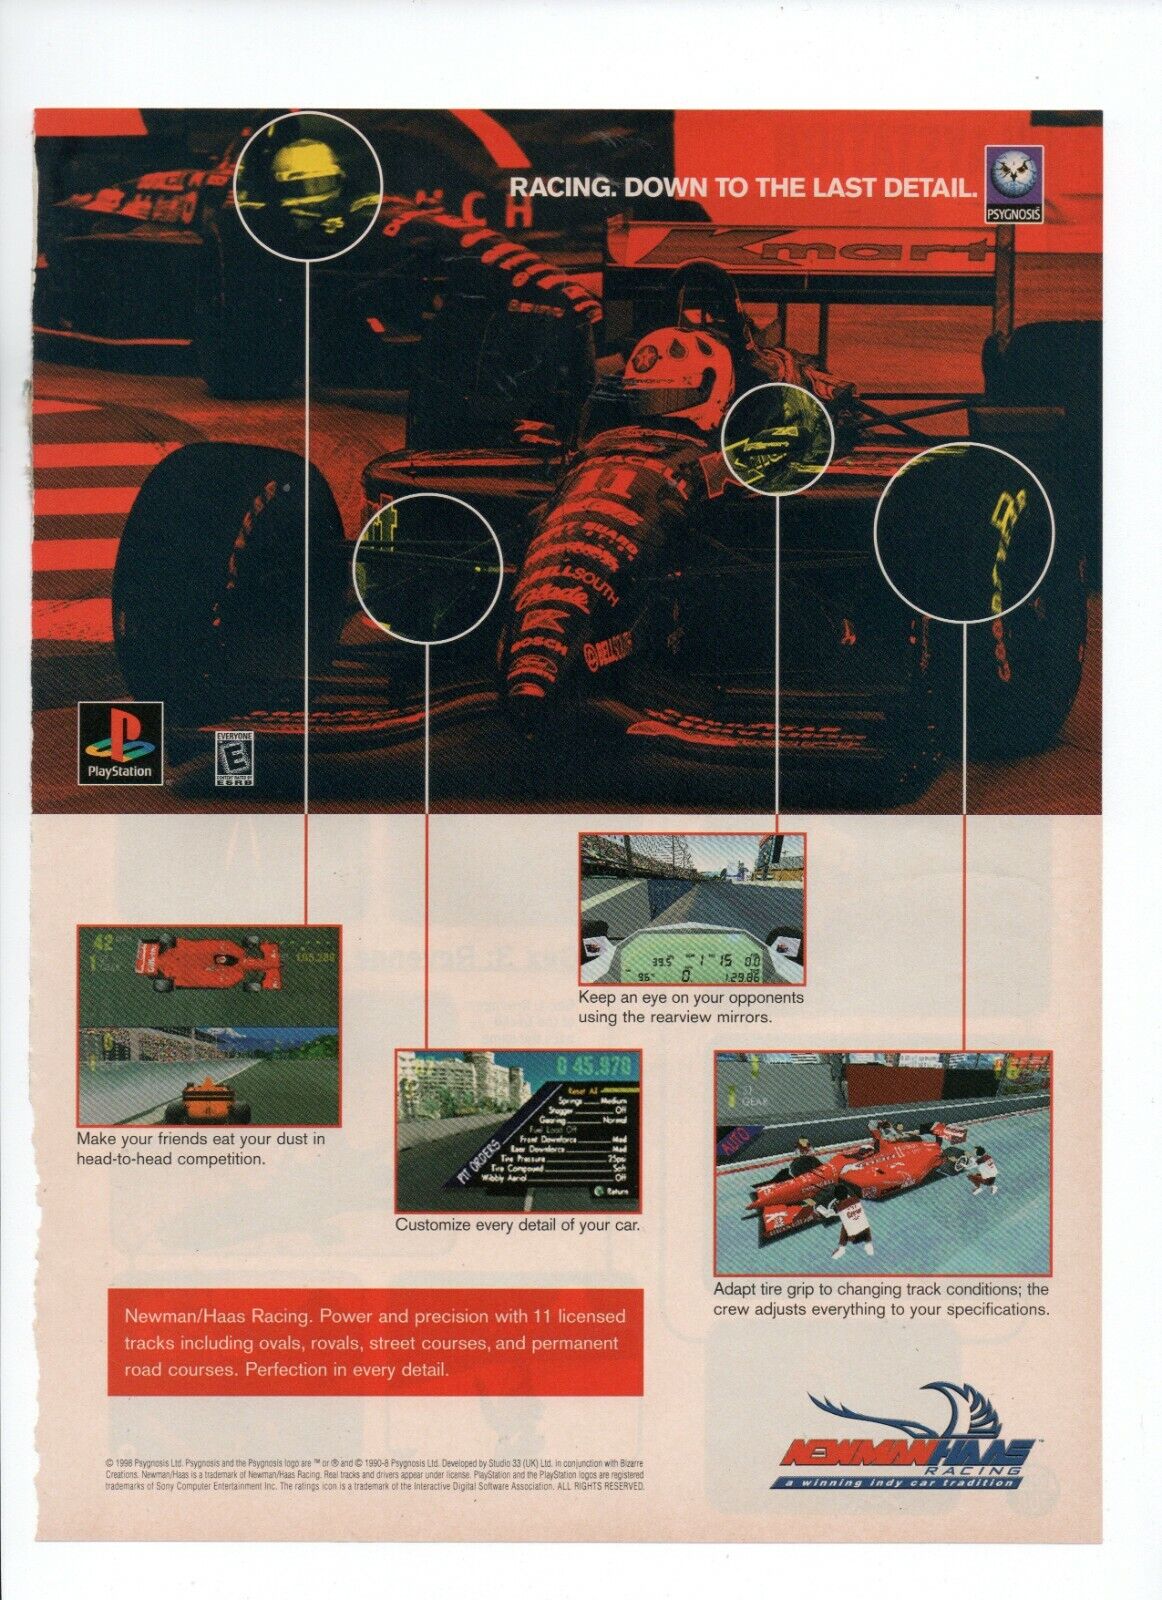 Newman Haas Racing Playstation Indy Car - 1998 Video Game PRINT AD